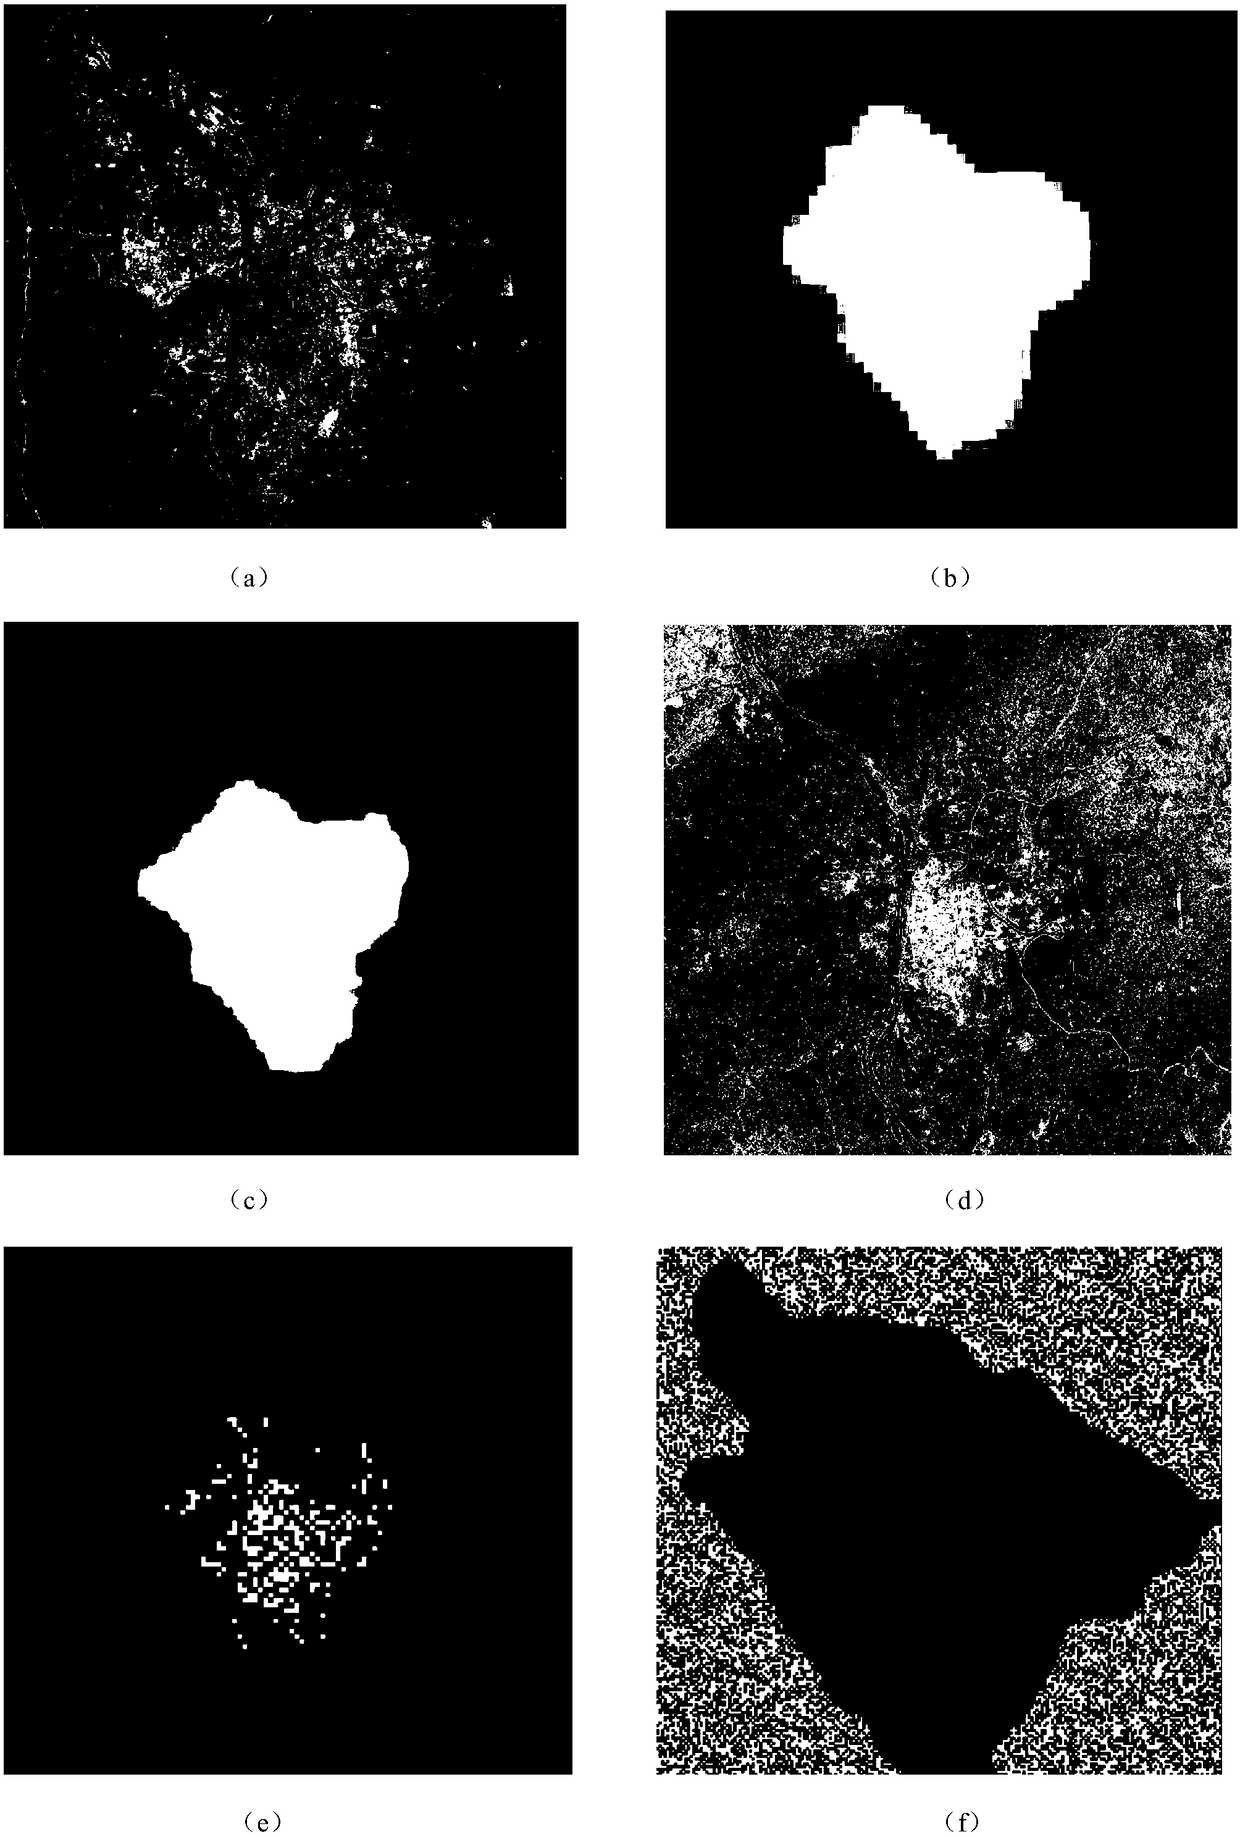 A City Boundary Extraction Method Fused with Multispectral Remote Sensing Data and Night Light Remote Sensing Data